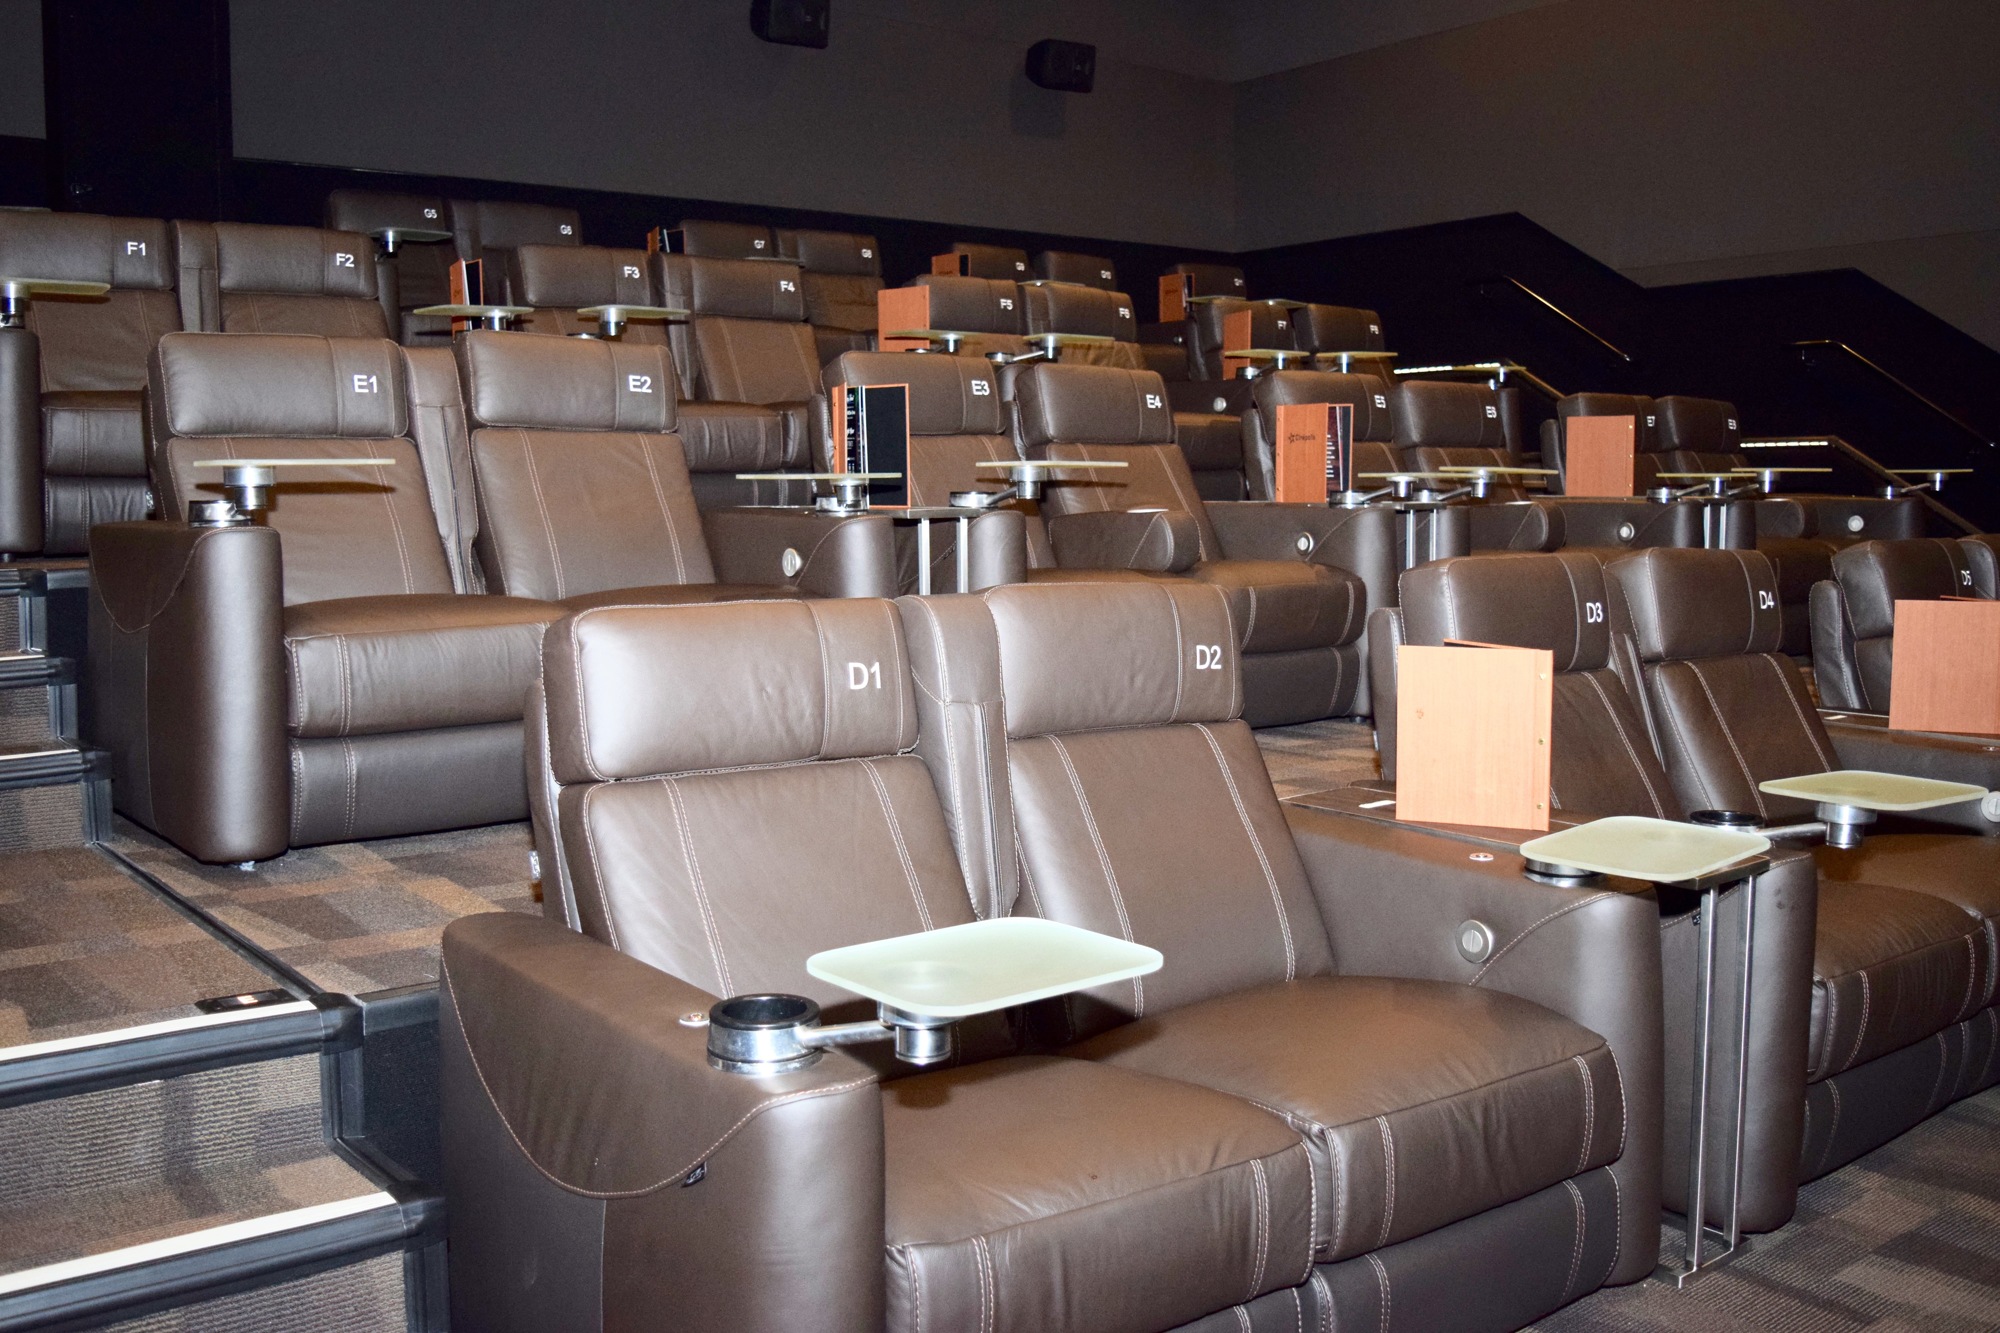 Each of the 10 auditoriums boasts fully reclining leather seats.